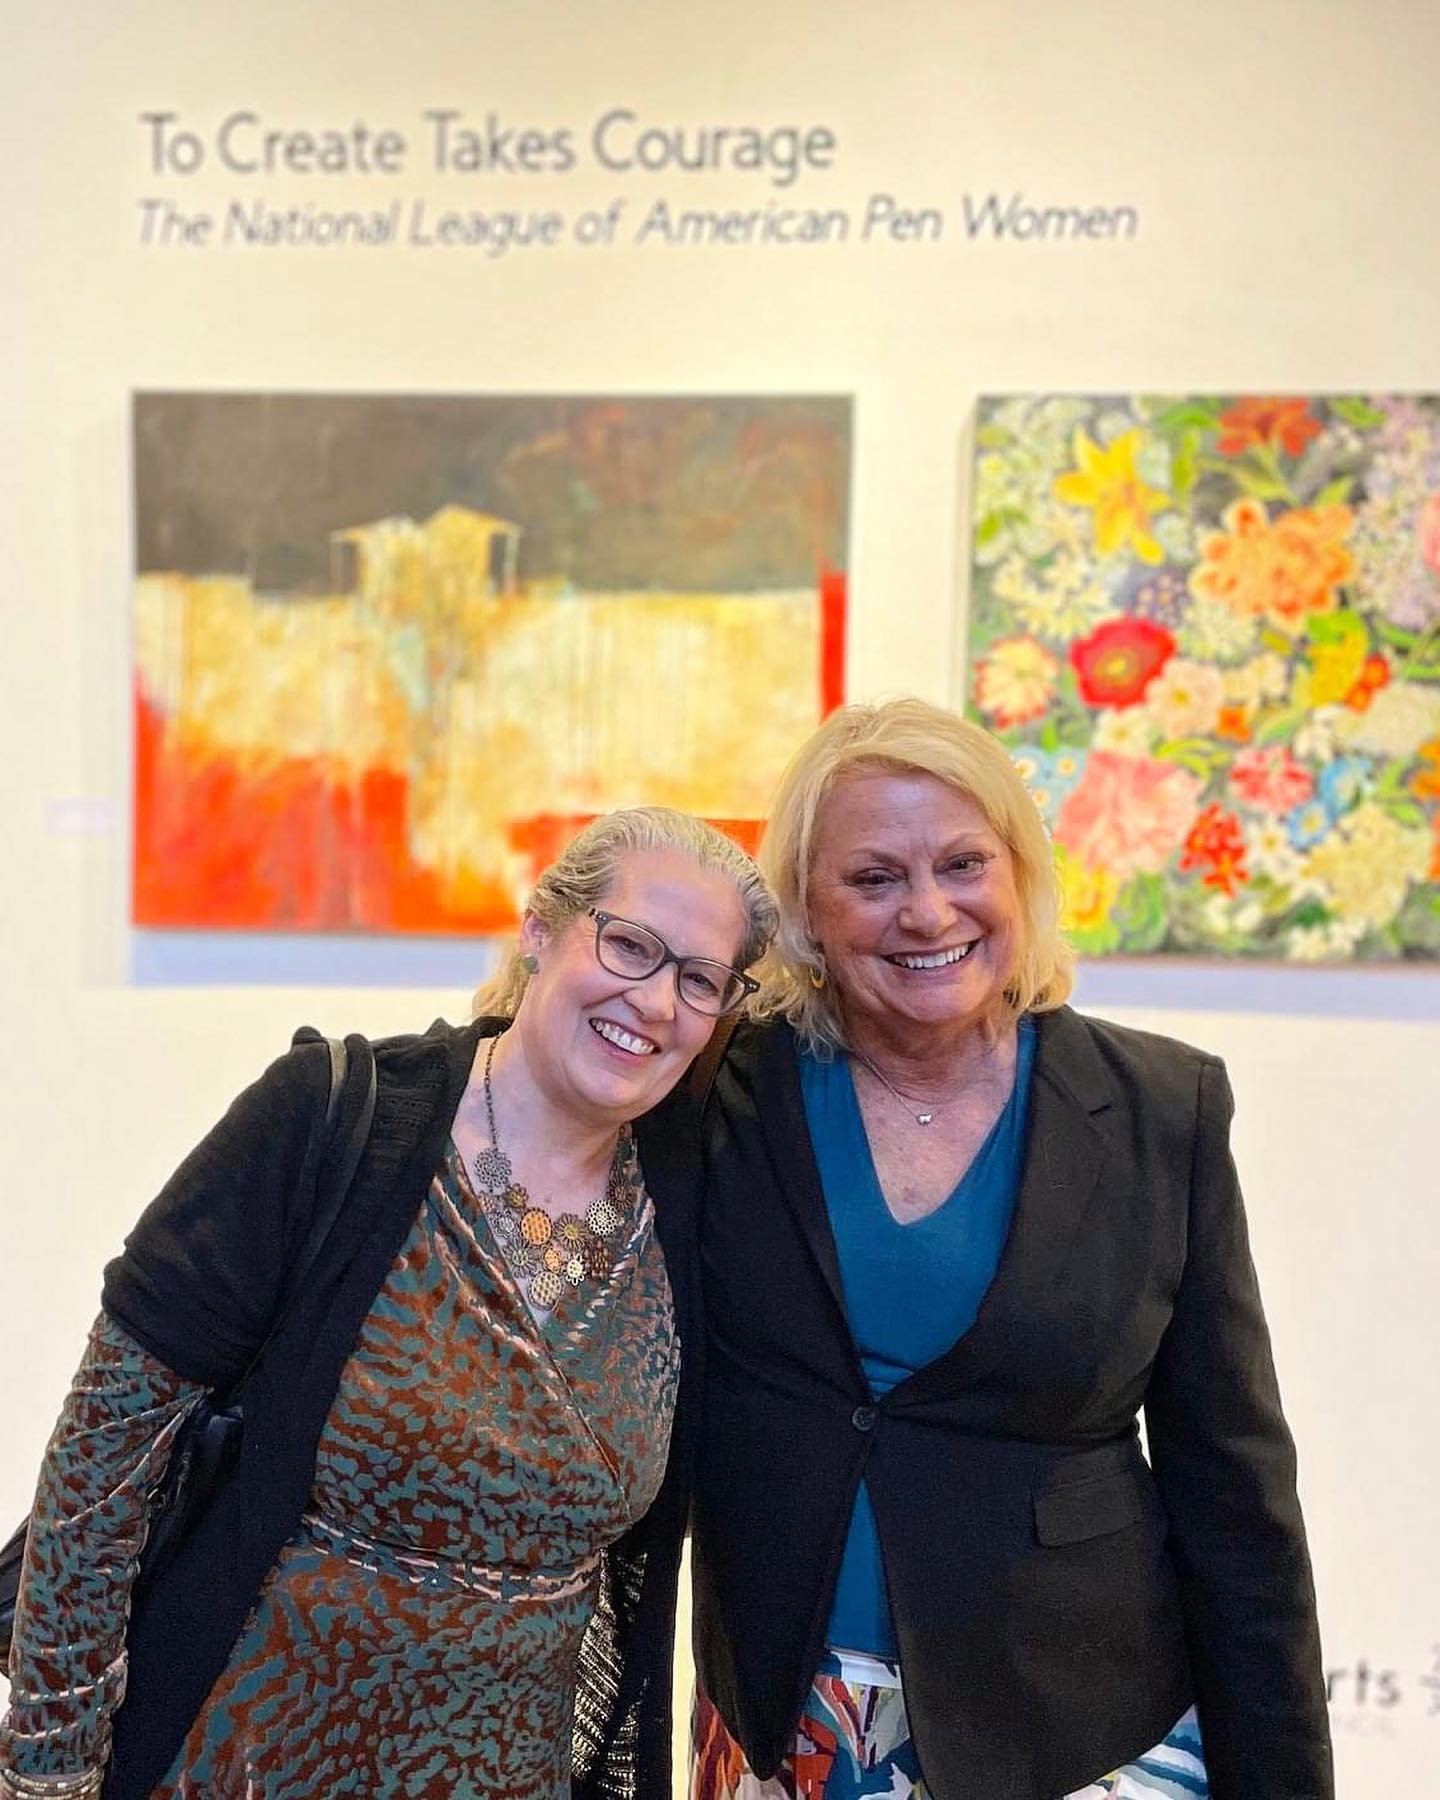 Last night was the opening reception for 2 shows that I&rsquo;m involved with through the National League of American Pen Women at the Columbus Cultural Arts Center.  It was a wonderful night and I&rsquo;m so honored to be part of it!  if you&rsquo;r